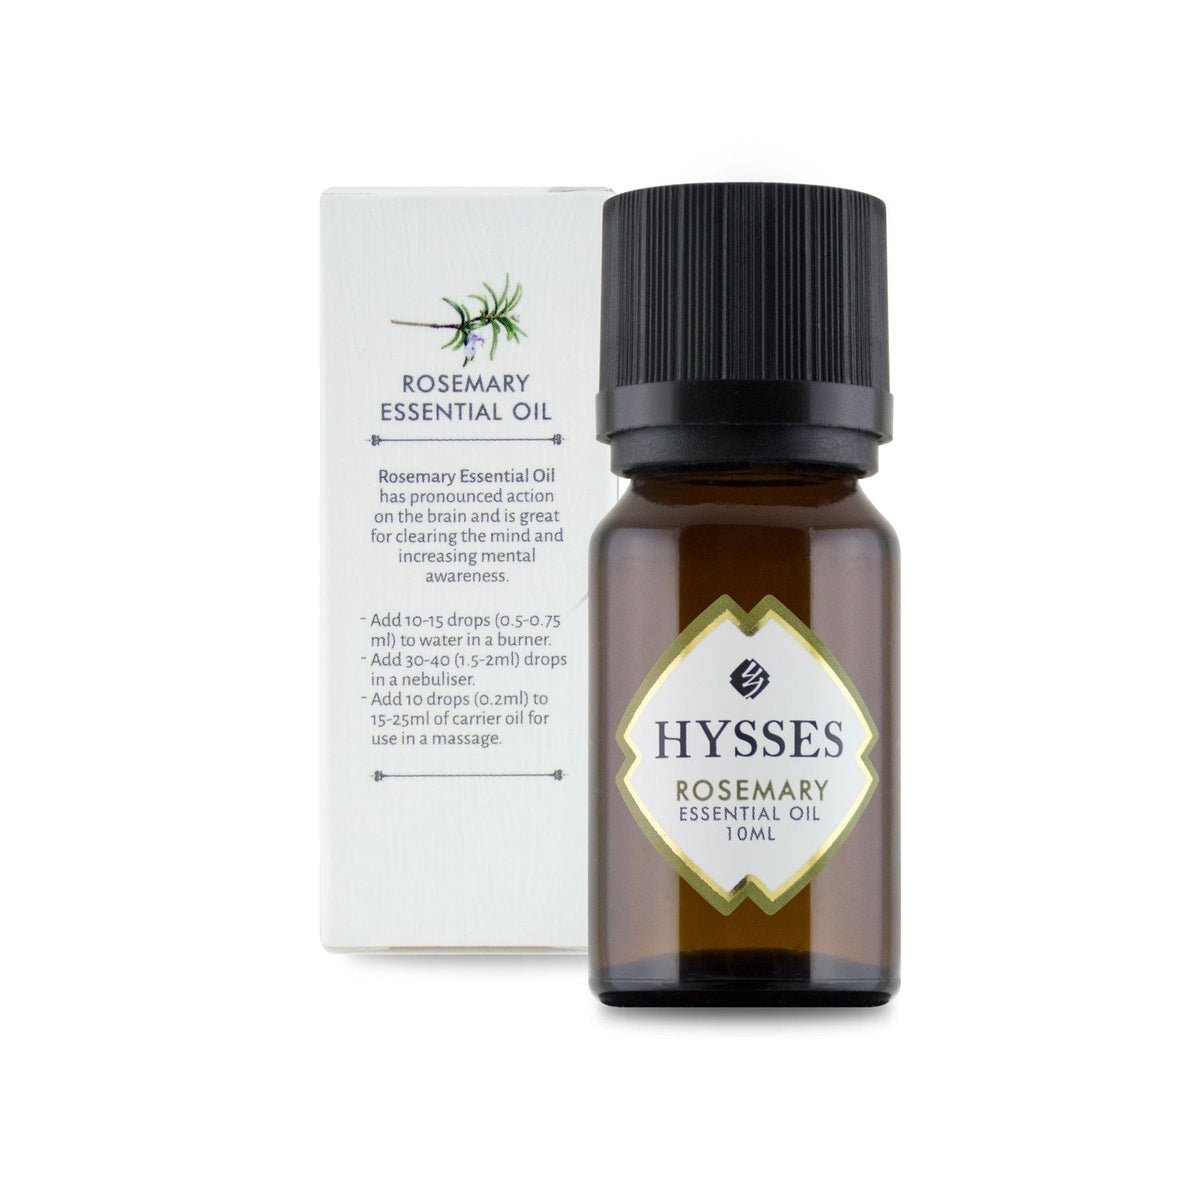 Hysses Essential Oil Essential Oil Rosemary